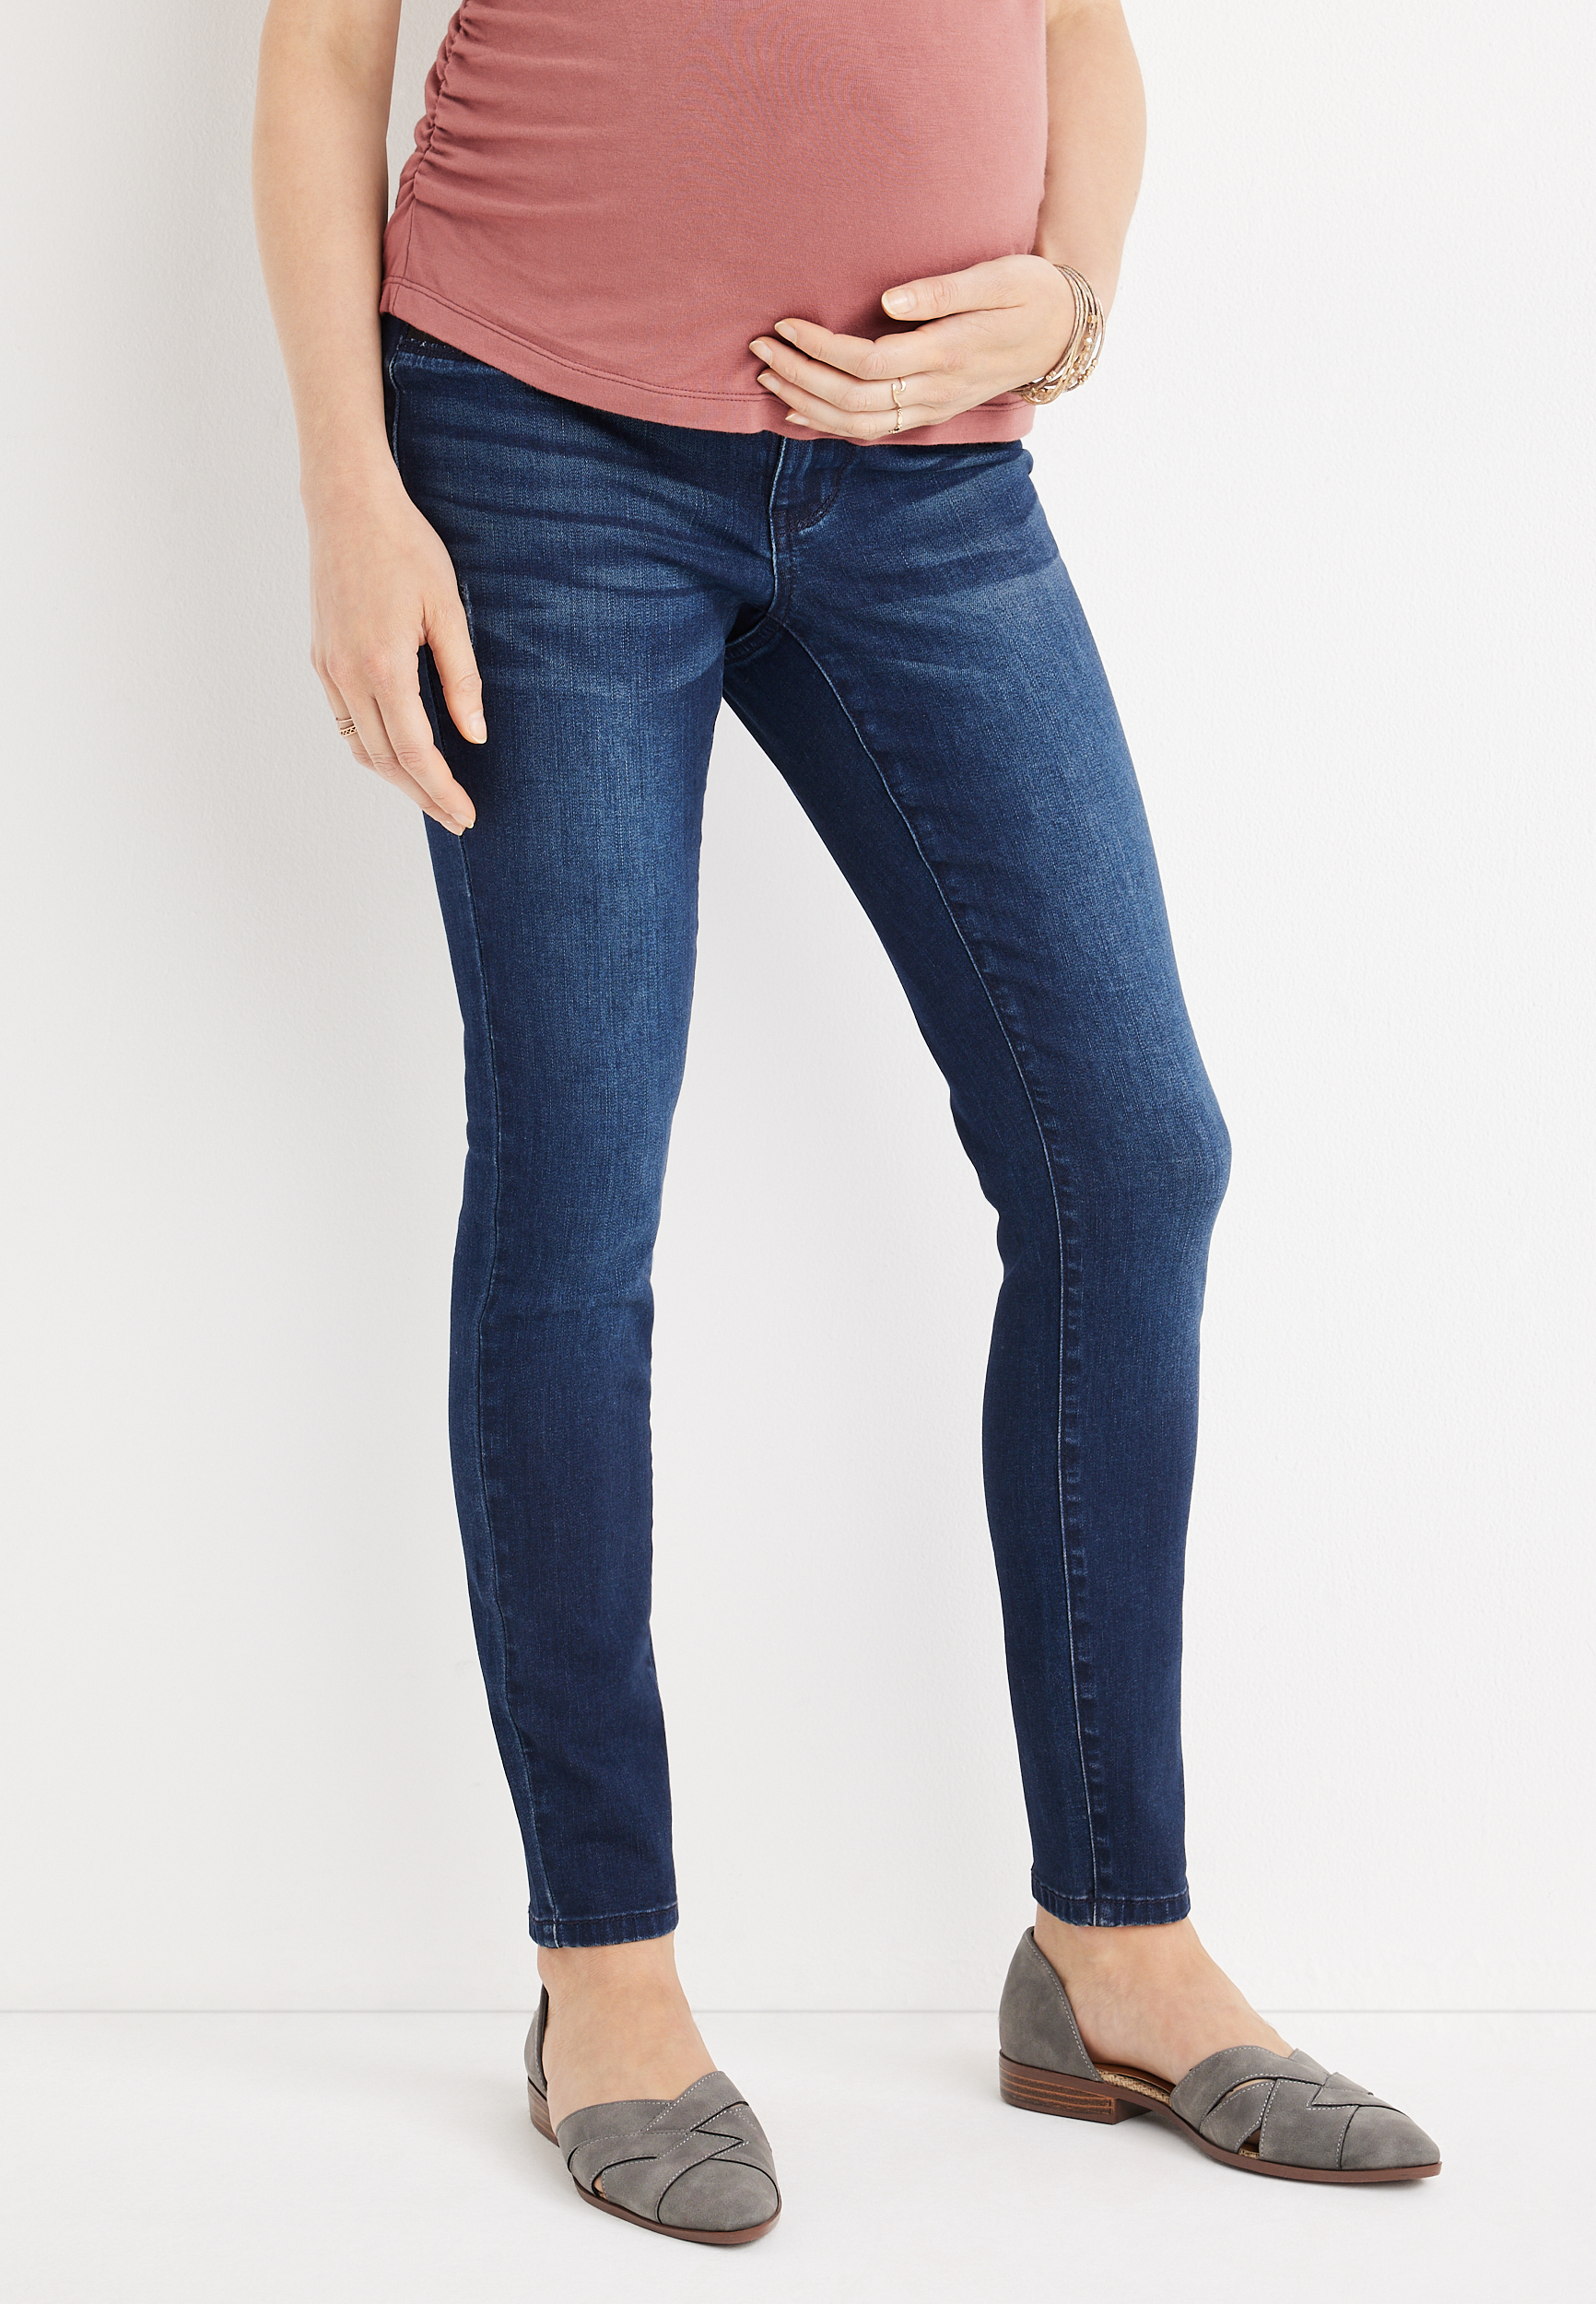 KanCan™ Skinny Side Panel Maternity Jean | maurices